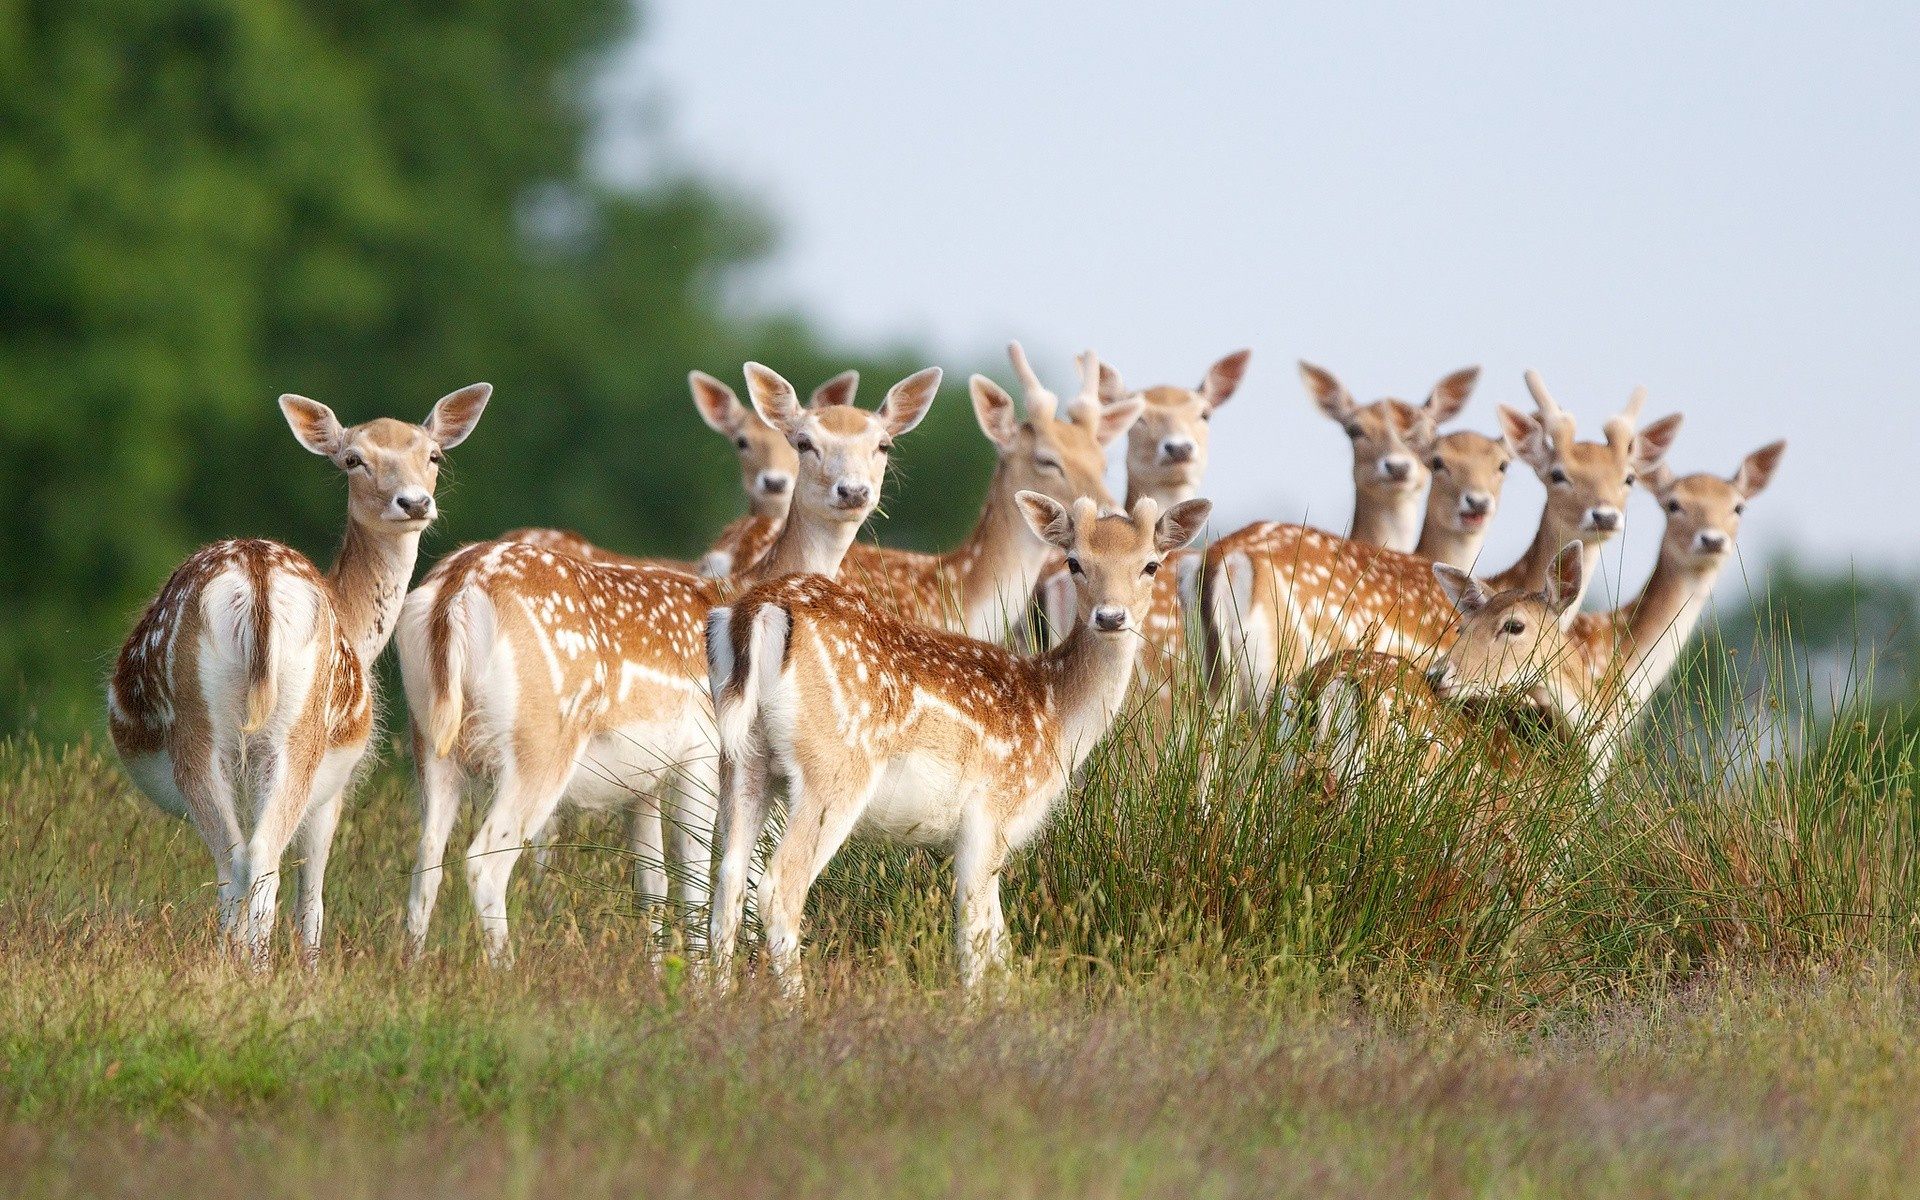 What is a group of deer called?